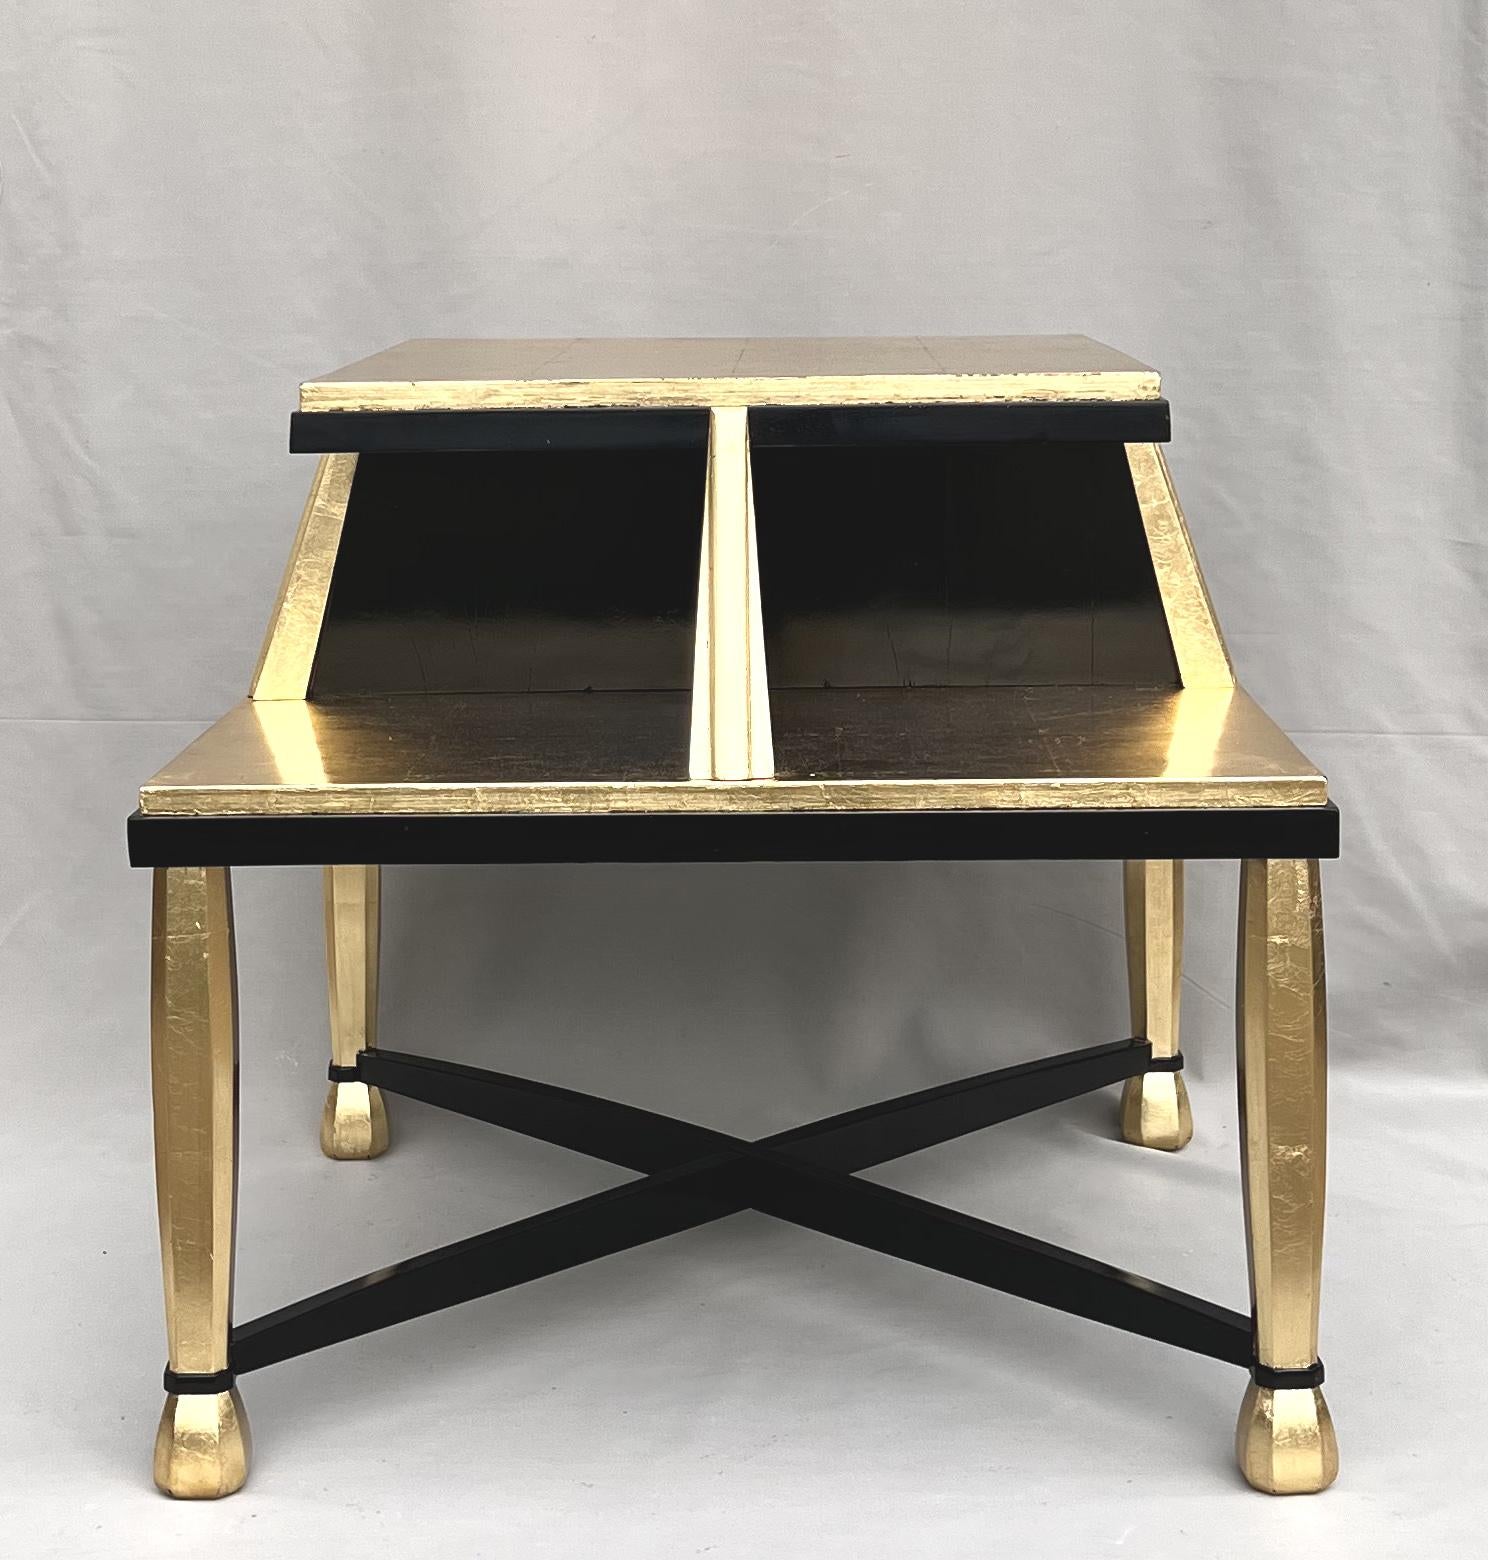 Art Deco Coffee Table in Giltwood and Black Lacquer, 1930s For Sale 9